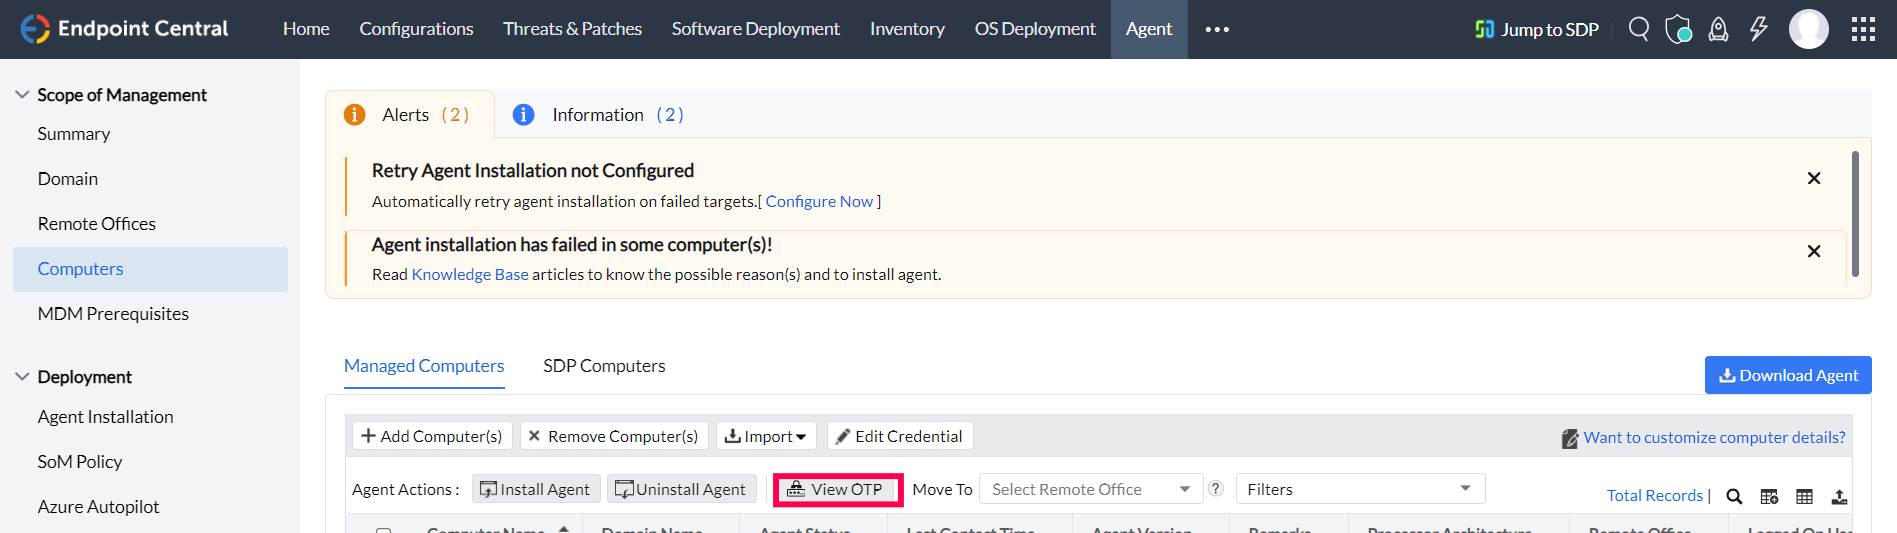 View OTP option in Endpoint Central Server